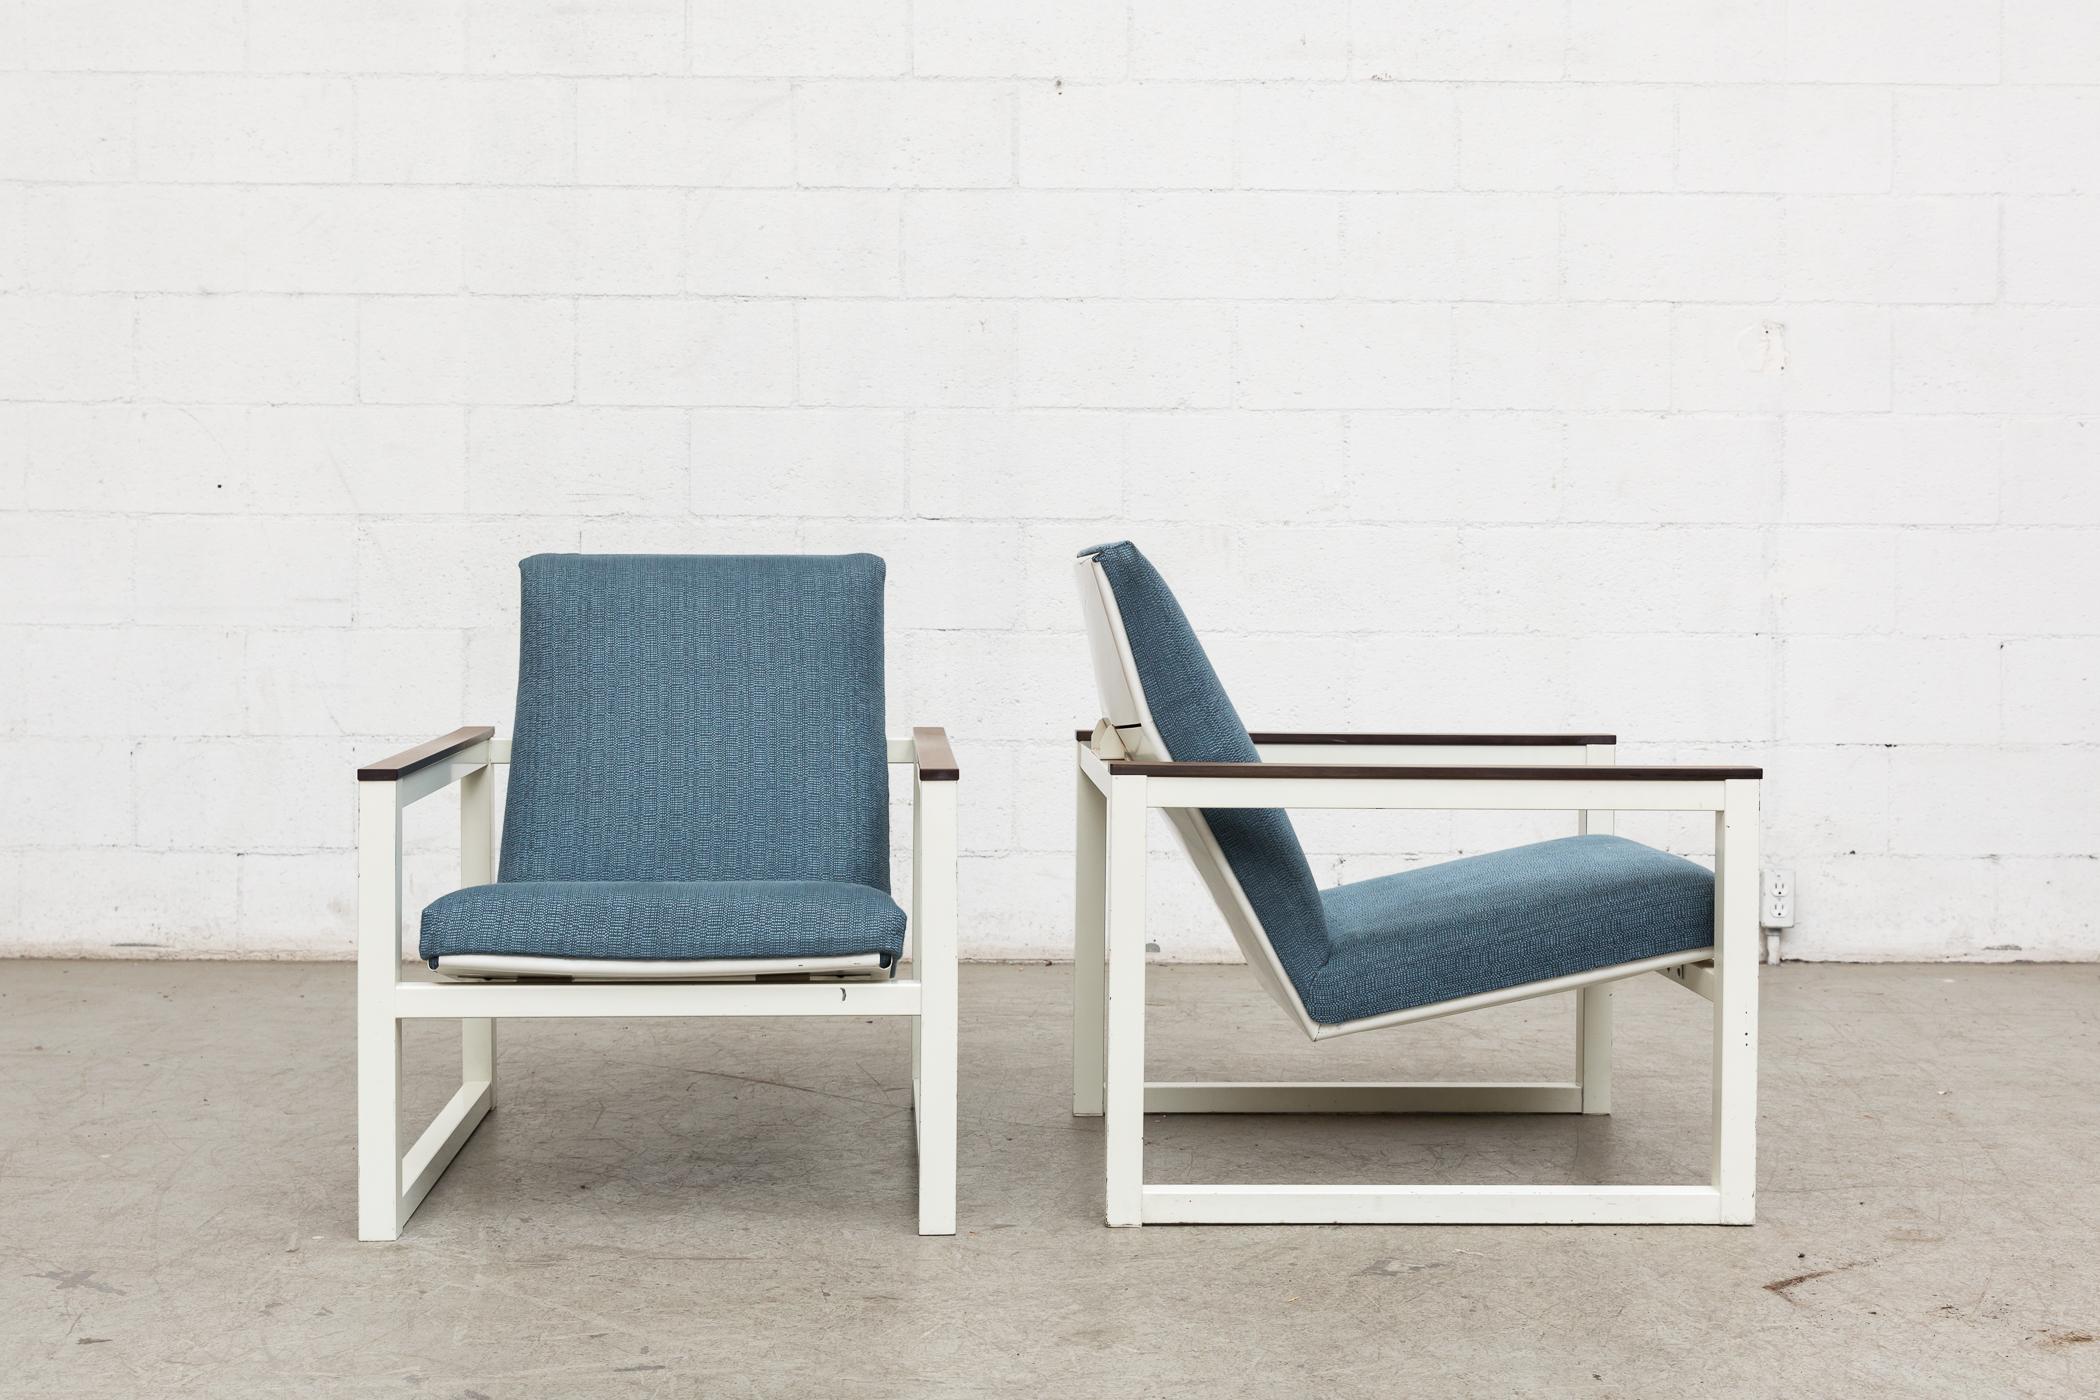 Pair of Mid-Century Cube Chairs Designed by Friso Kramer and Tjerk Reijenga for Pilastro. Newly Upholstered in Robins Egg Blue Fabric. White Enameled Metal Frames with Brown Formica Arm Rests, Visible Wear with Some Scratching to the Frame. Another